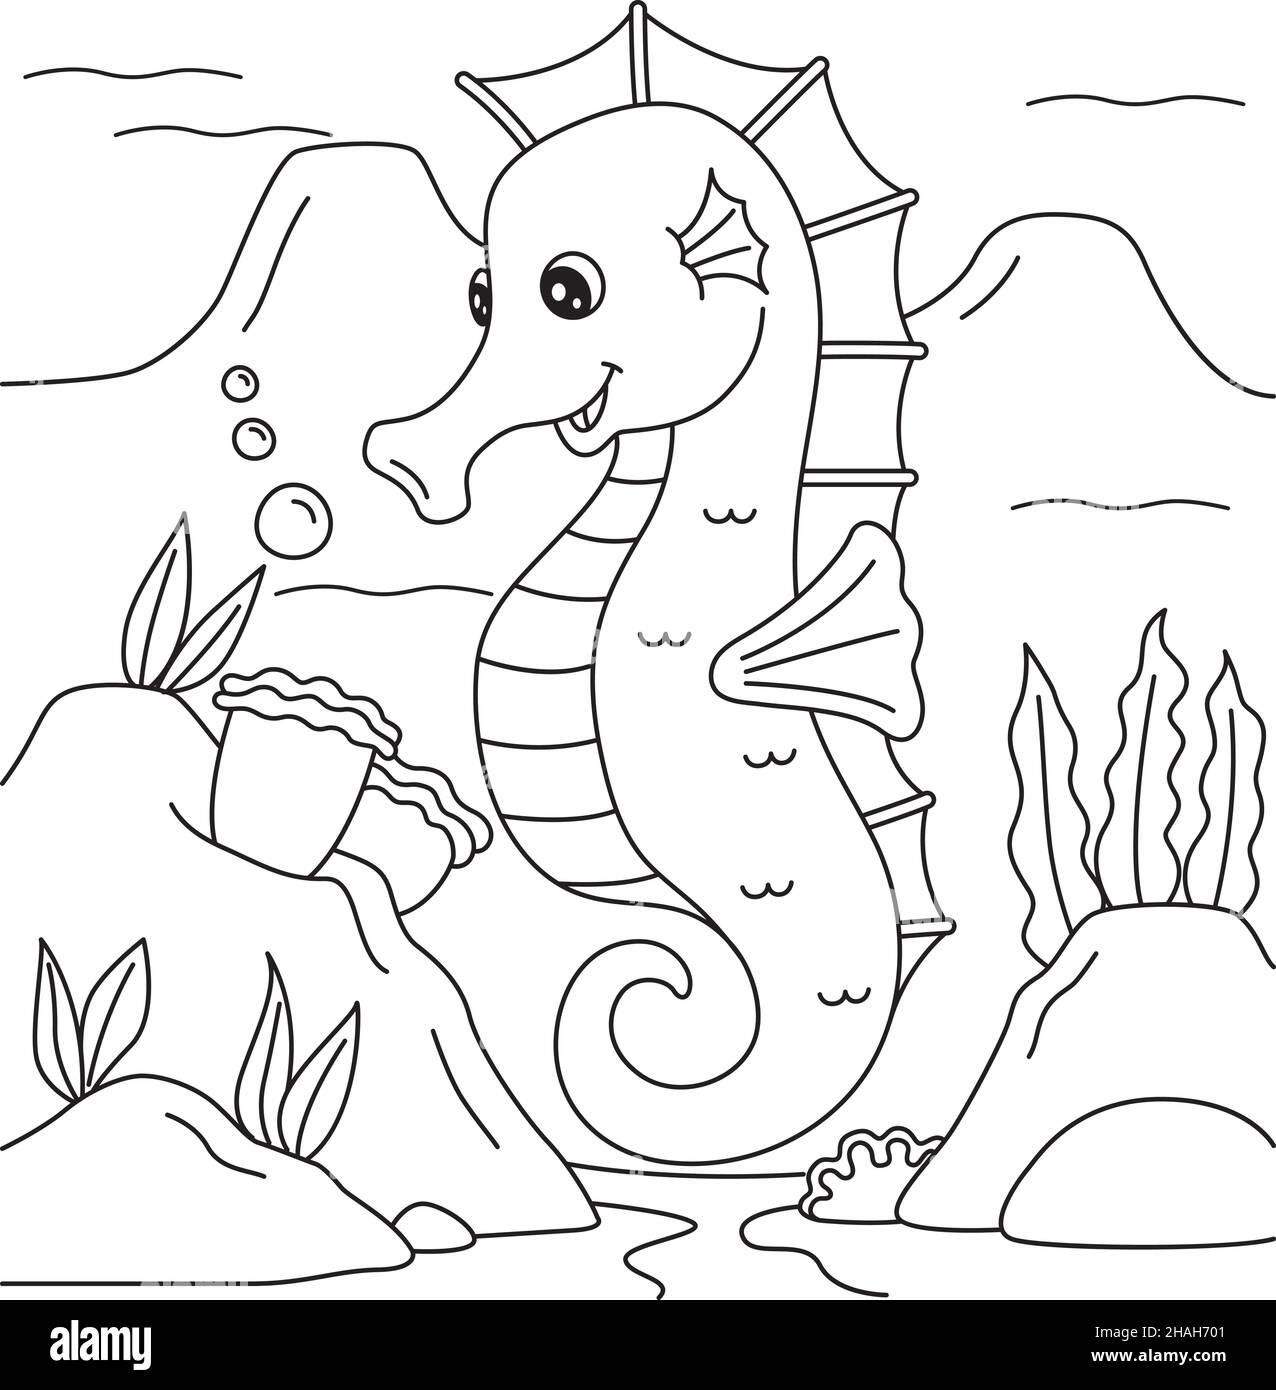 Seahorse Coloring Page for Kids Stock Vector